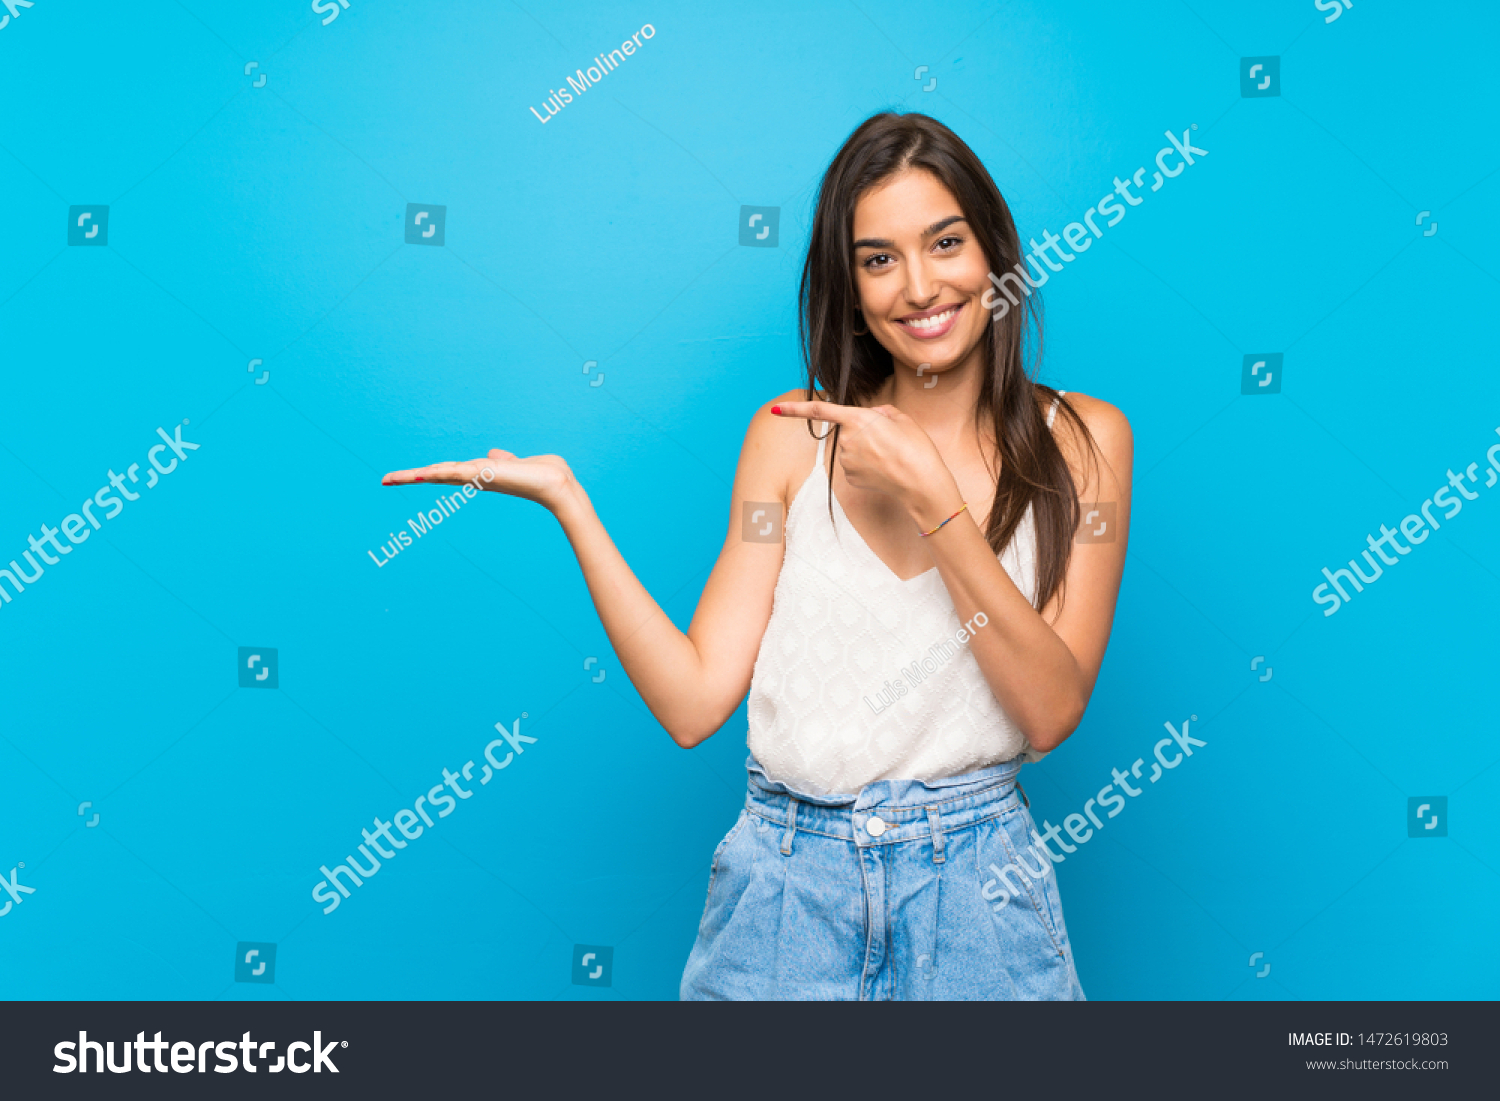 Young woman over isolated blue background holding copyspace imaginary on the palm to insert an ad #1472619803